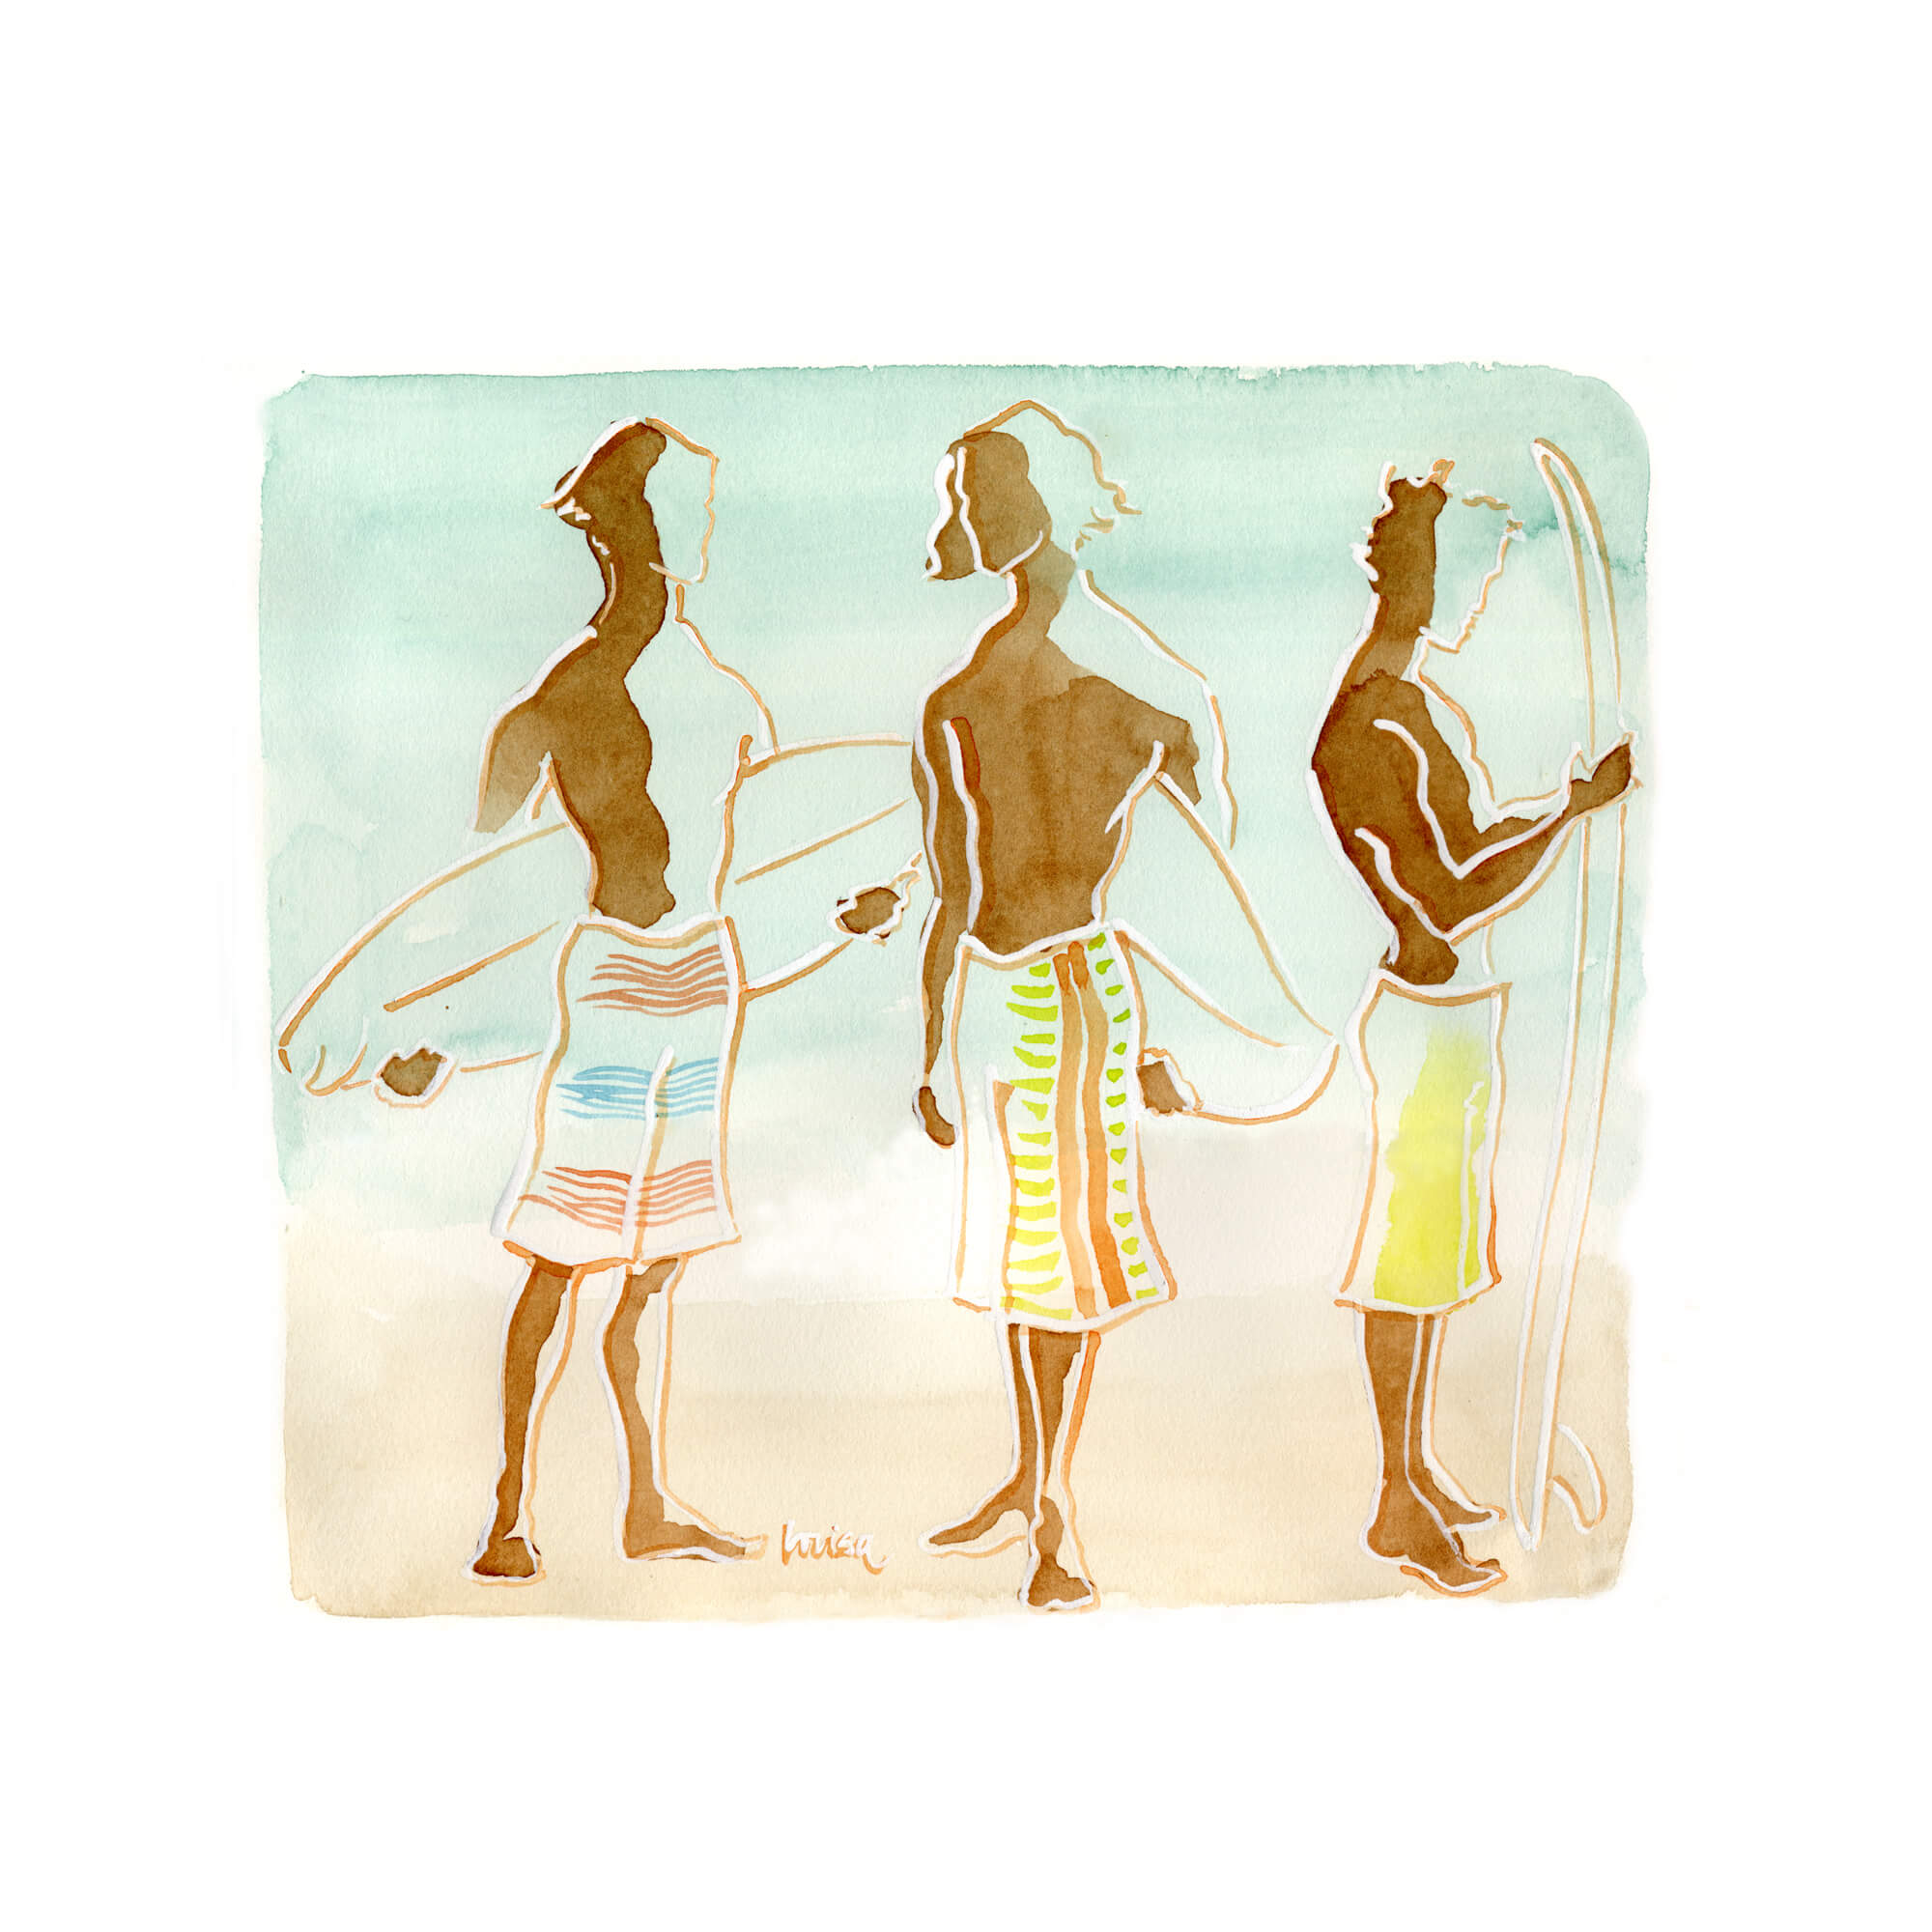 A paper giclée print of a watercolor artwork featuring three men surfers with surfboards by Hawaii artist Lovisa Oliv